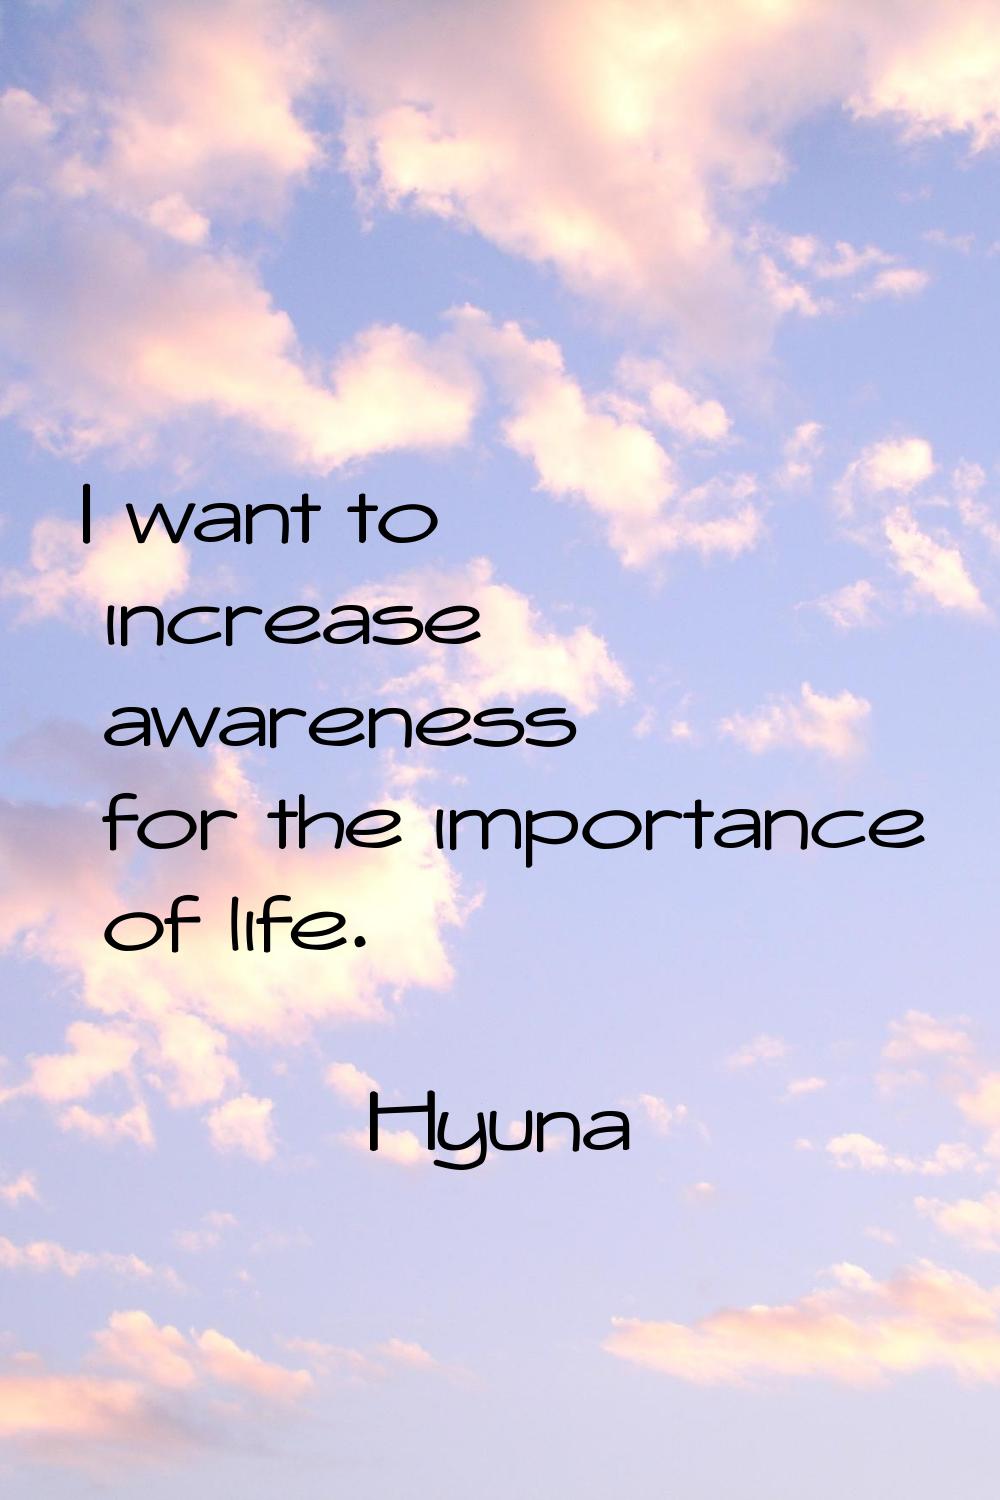 I want to increase awareness for the importance of life.